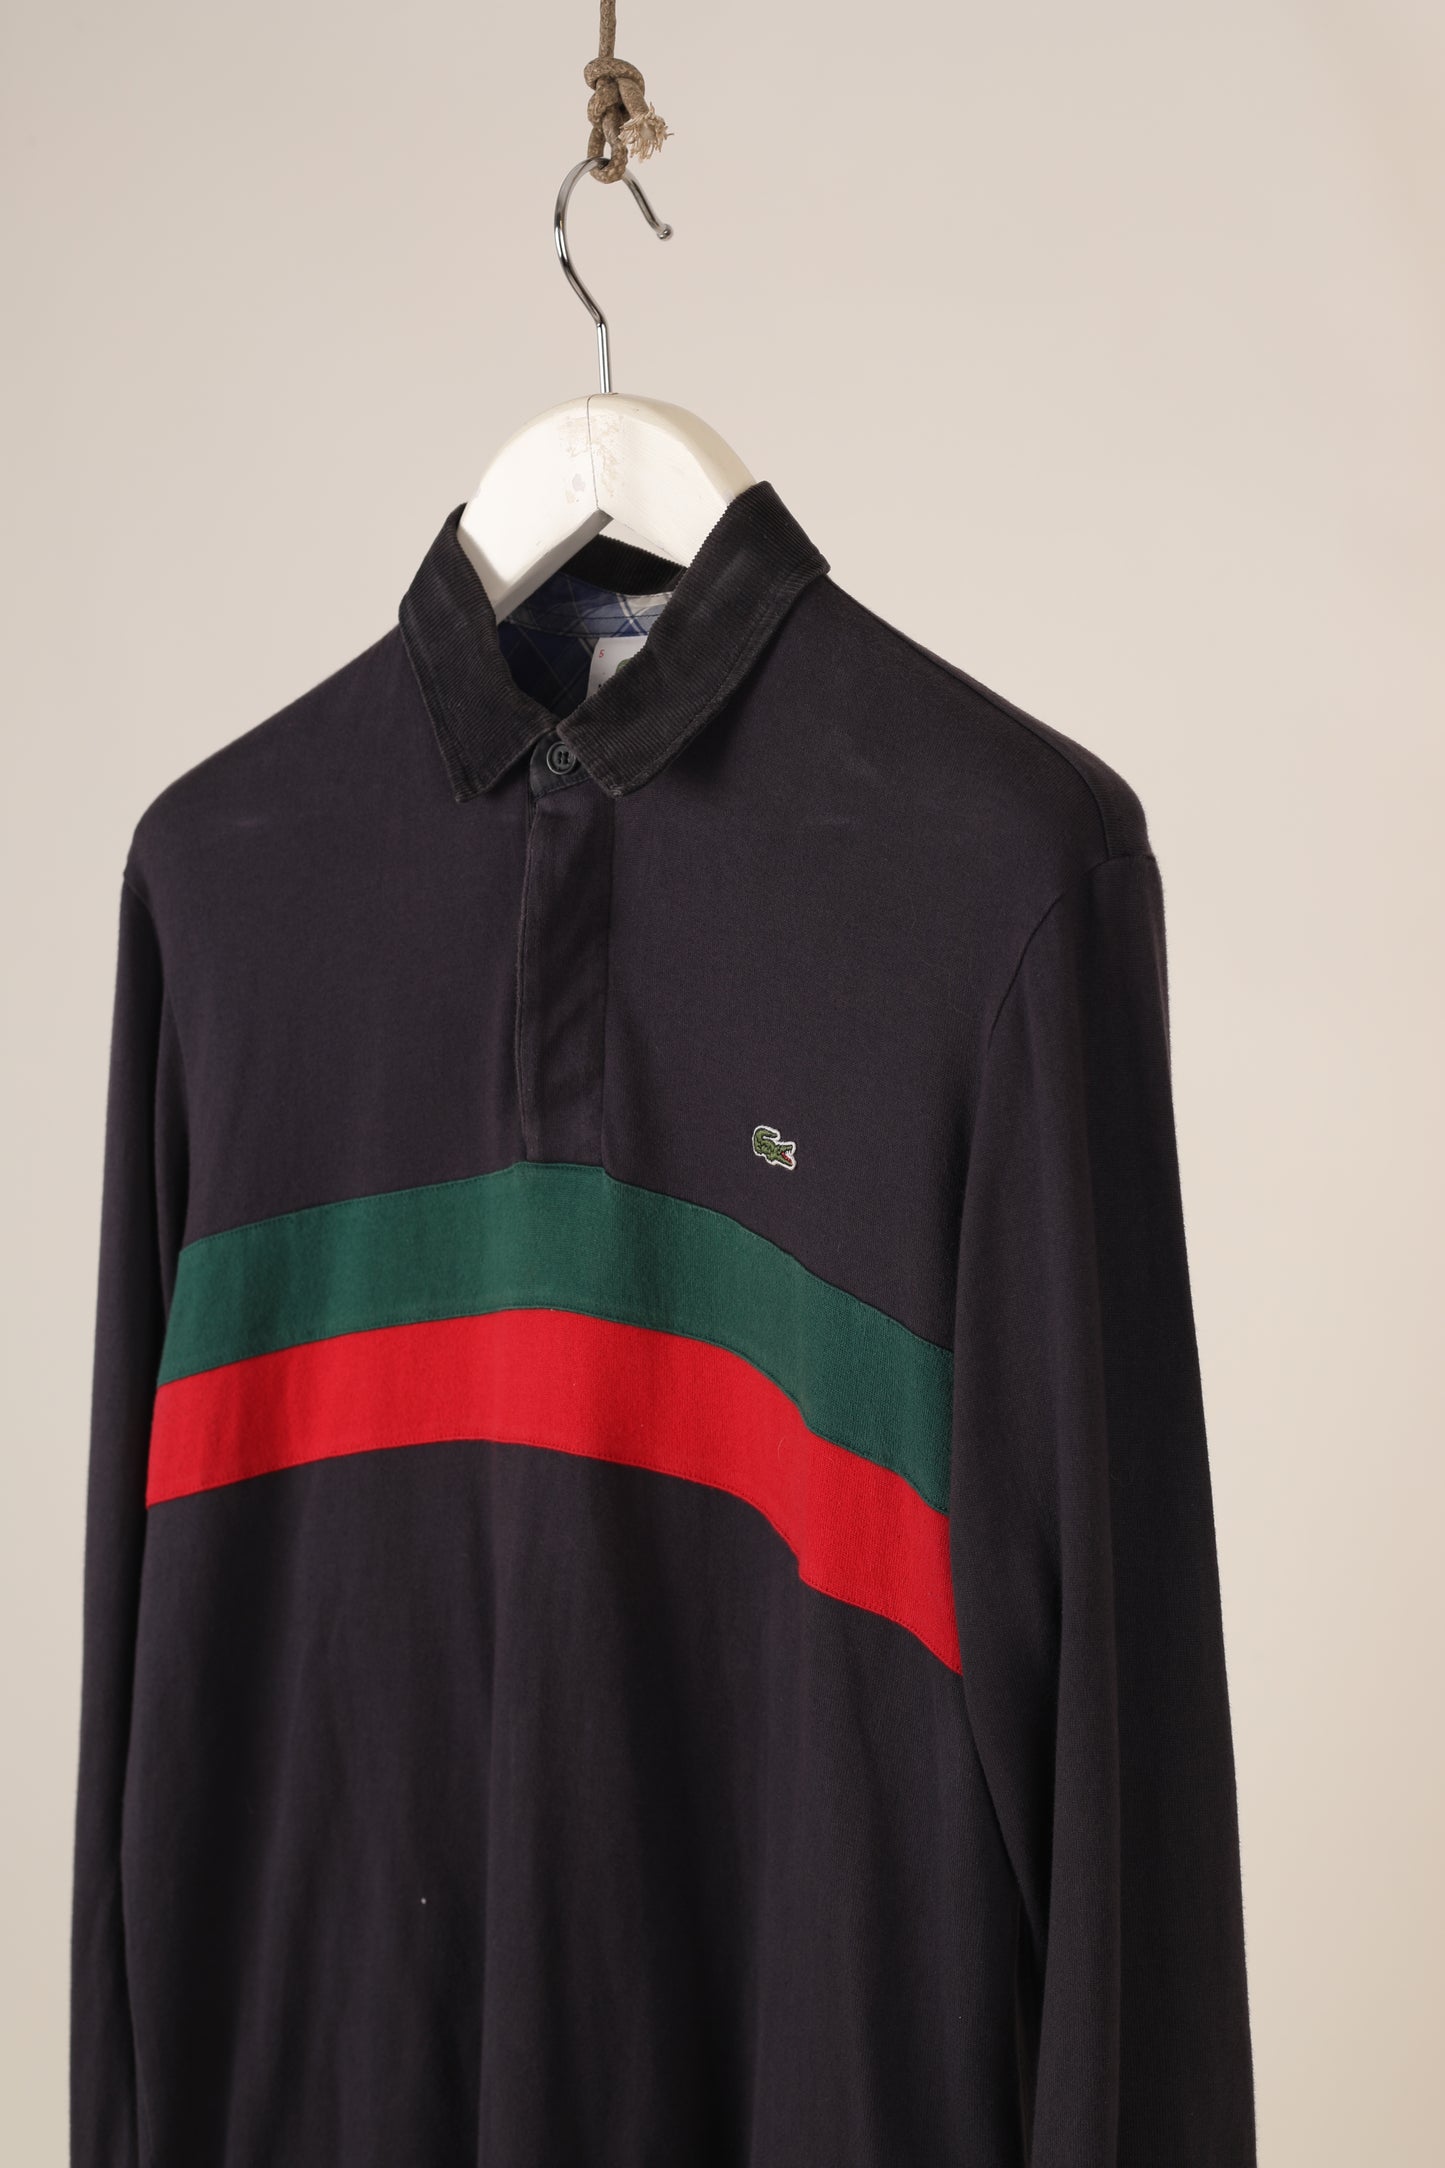 Lacoste stripe rugby shirt